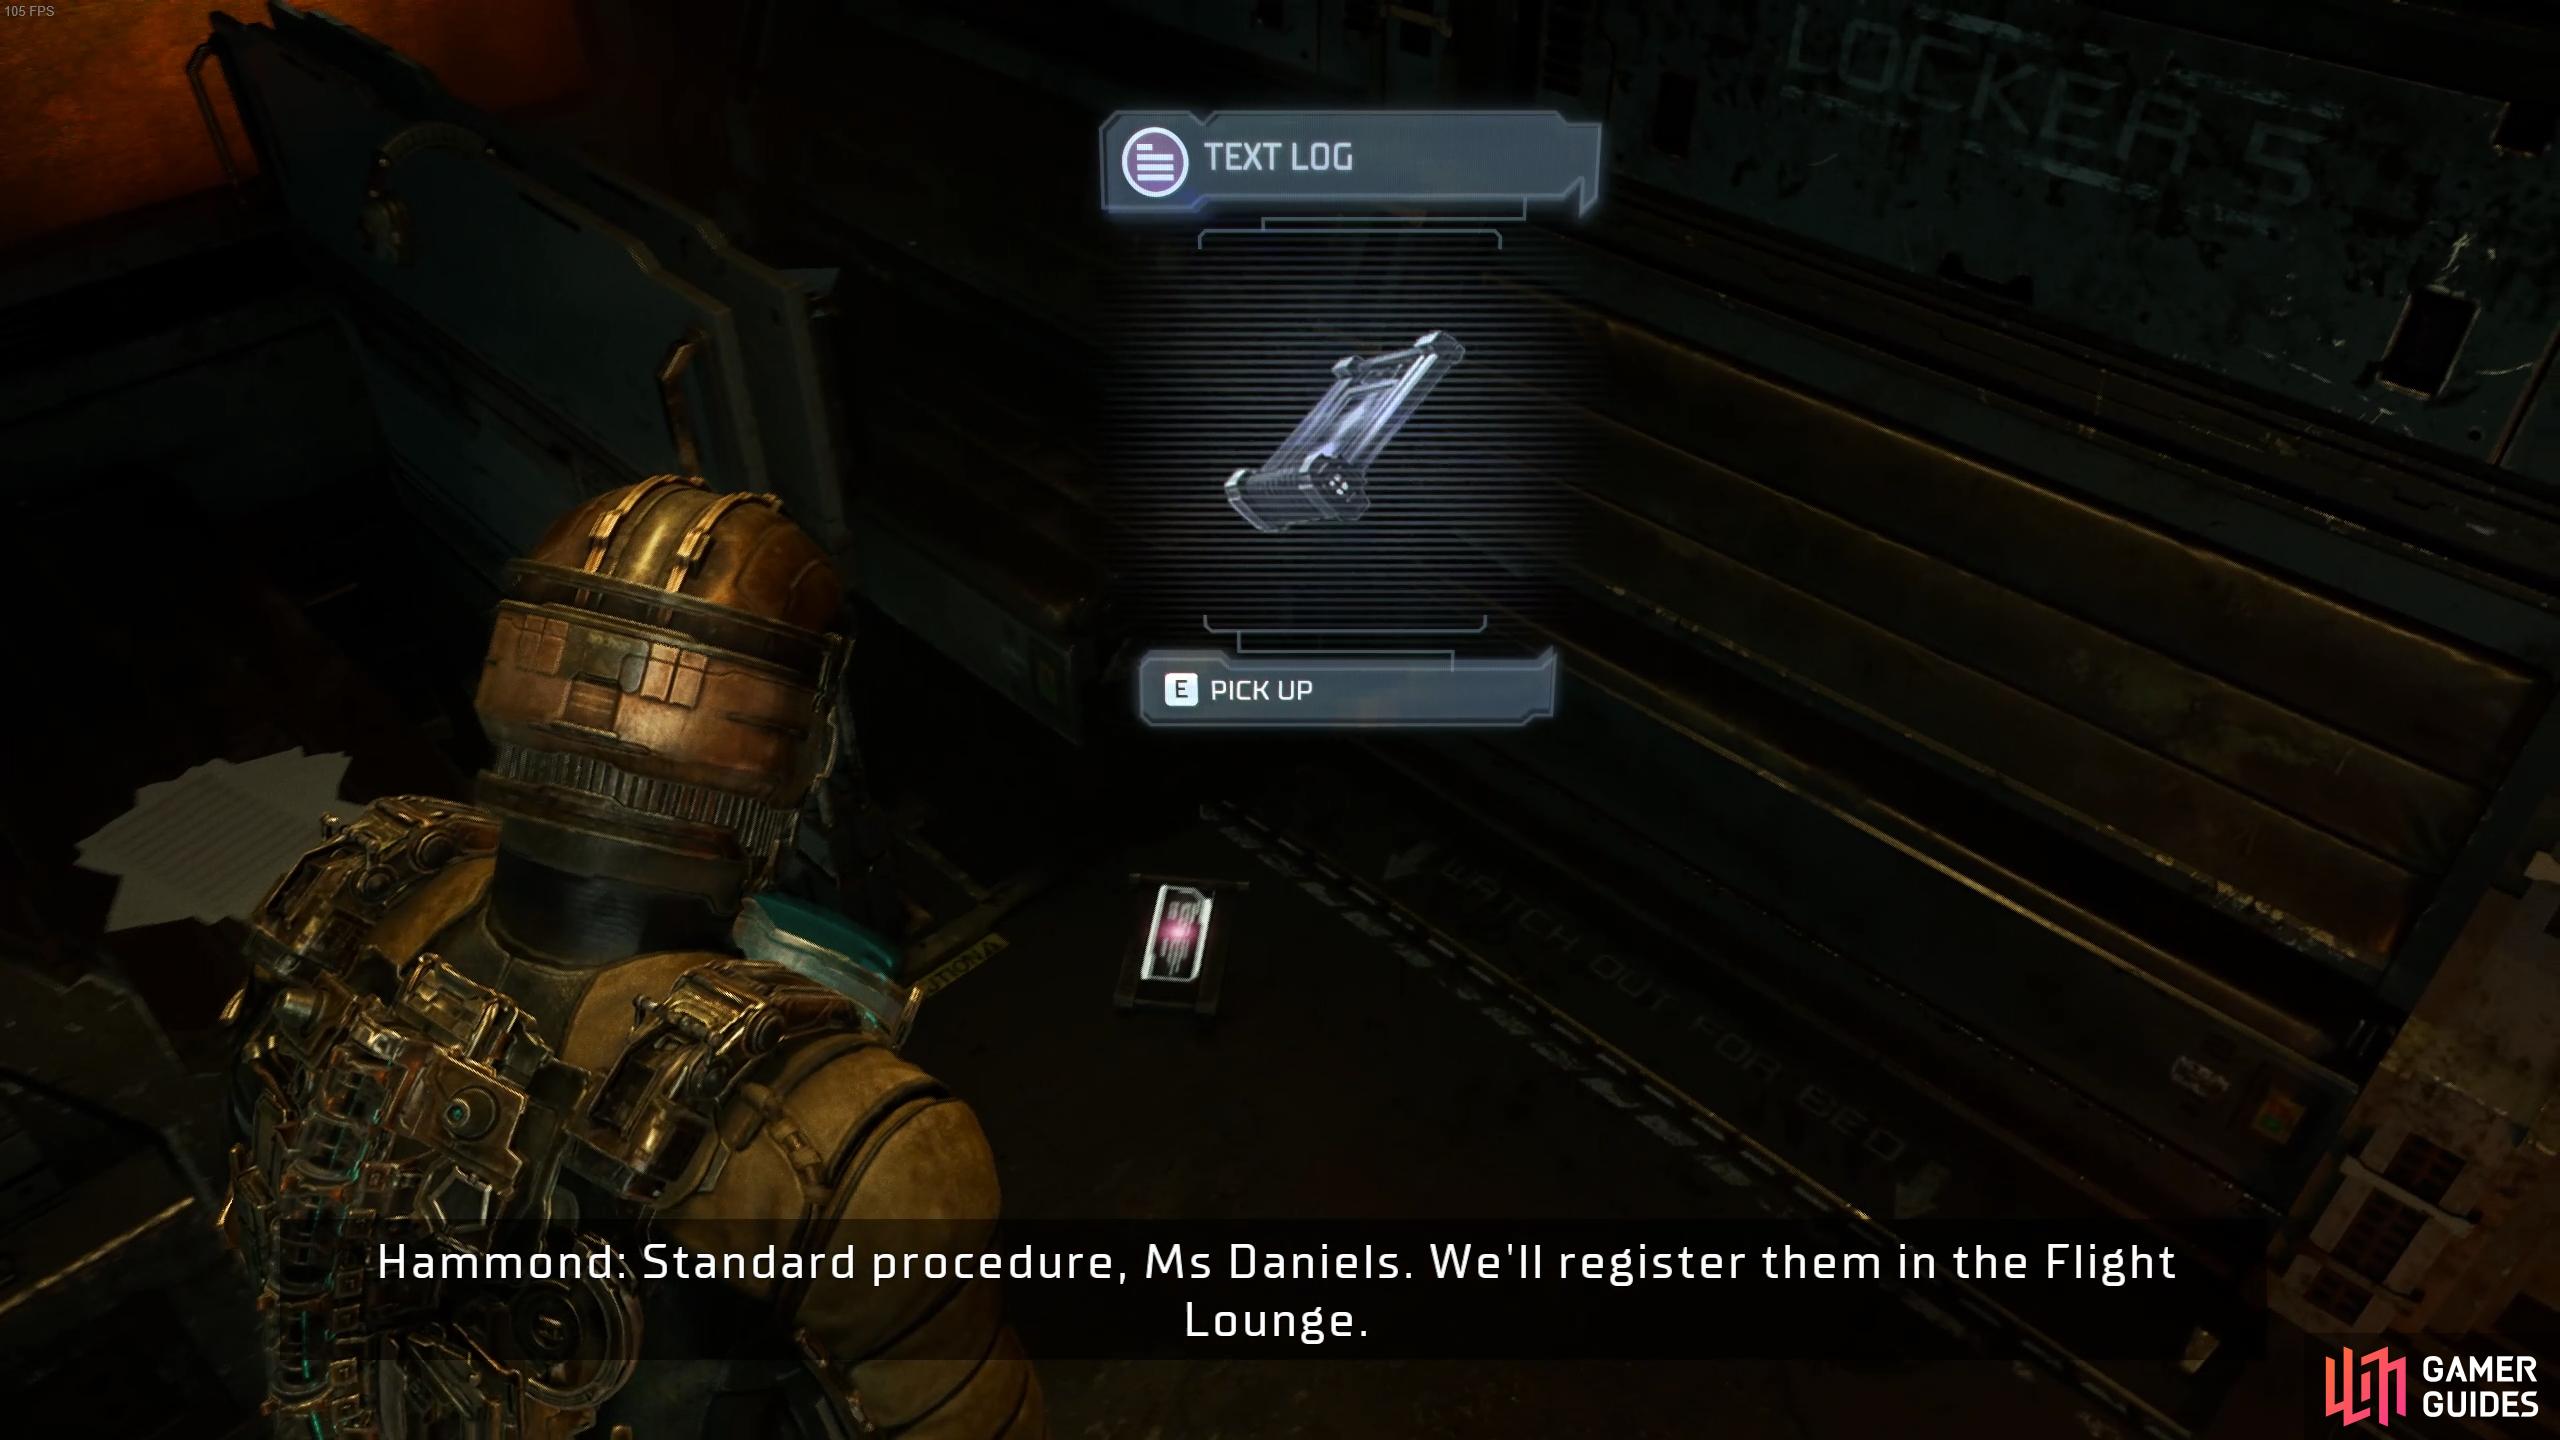 Dead Space Remake Site Is Hiding a Morse Code Easter Egg